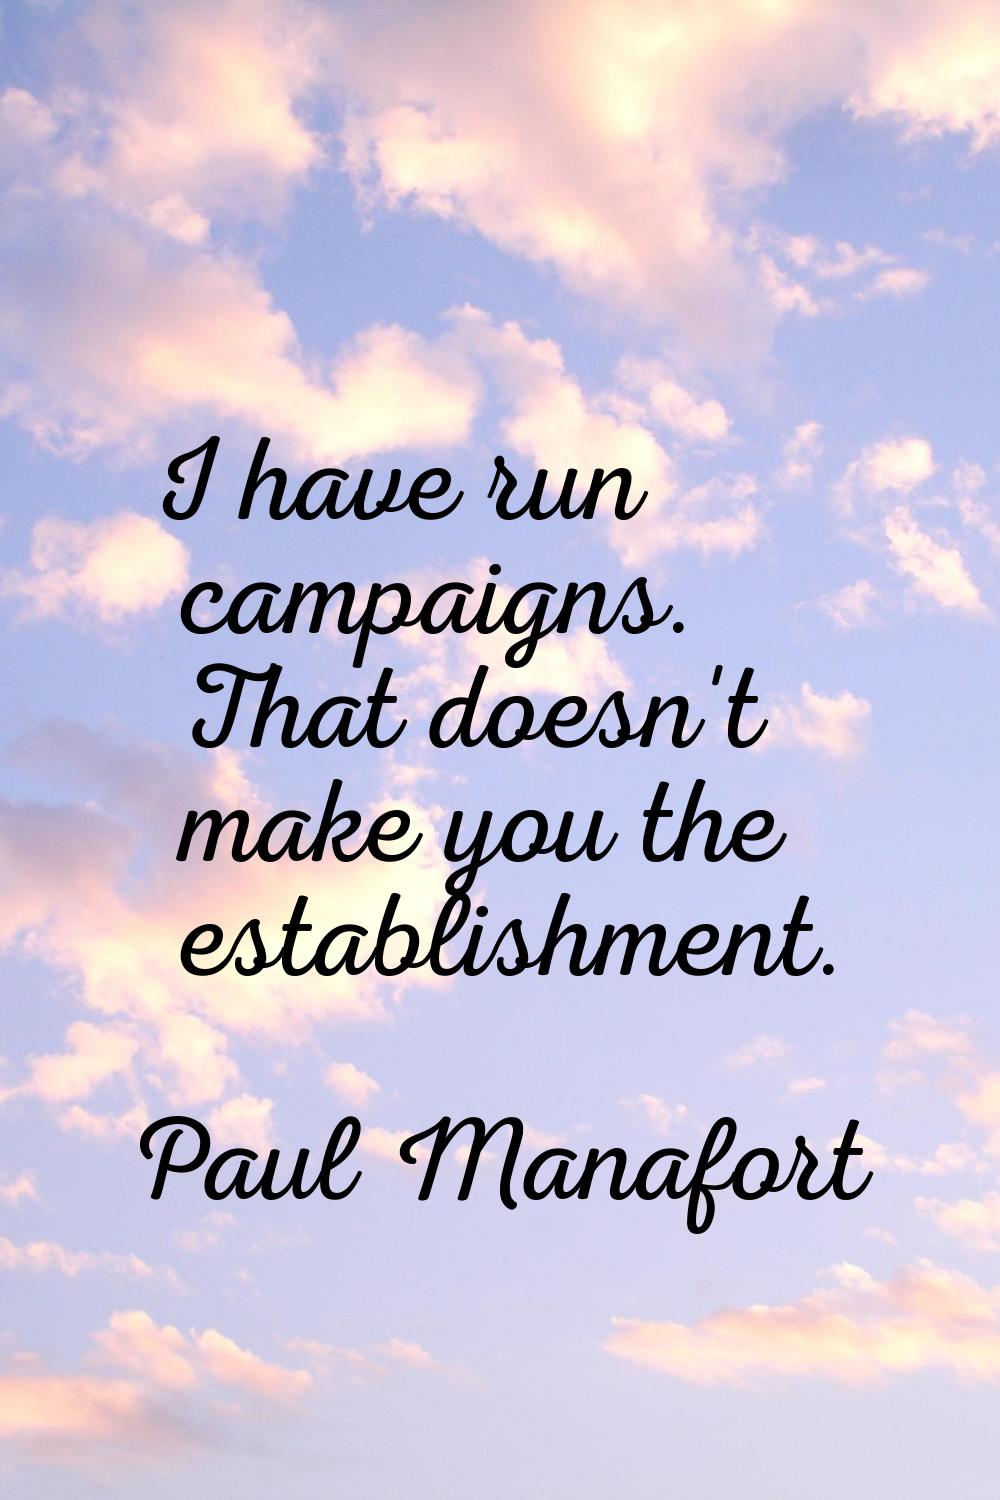 I have run campaigns. That doesn't make you the establishment.